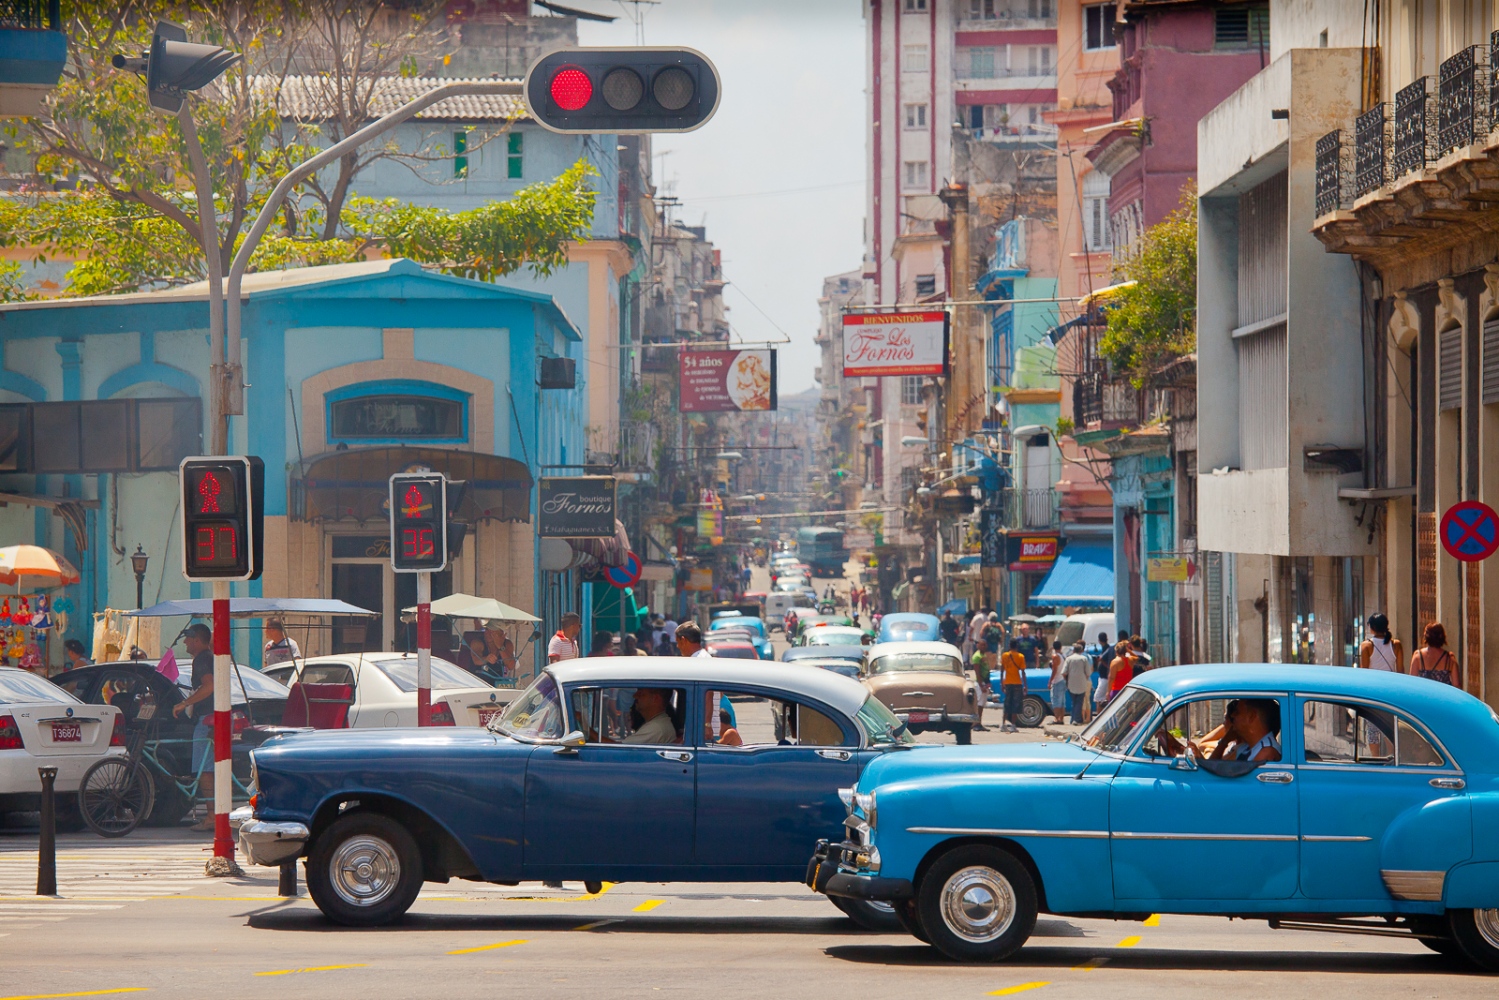 Island Out of Time - 1950s era vehicles are ubiquitous on Cuban streets. Most...